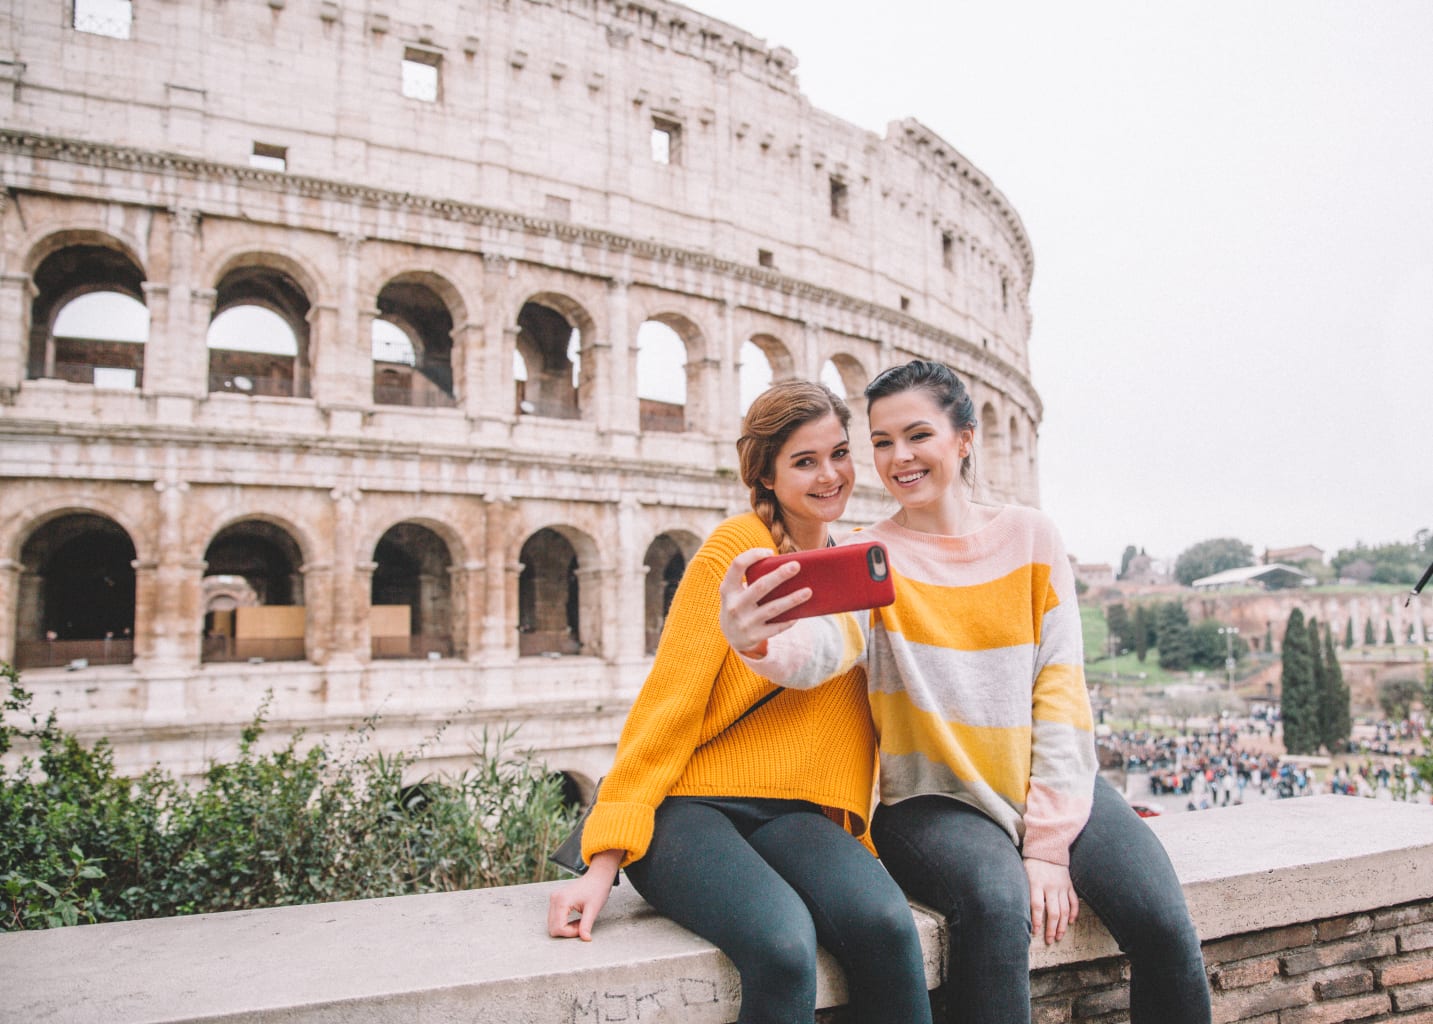 Two students taking a selfie in front of the Colosseum in Italy.